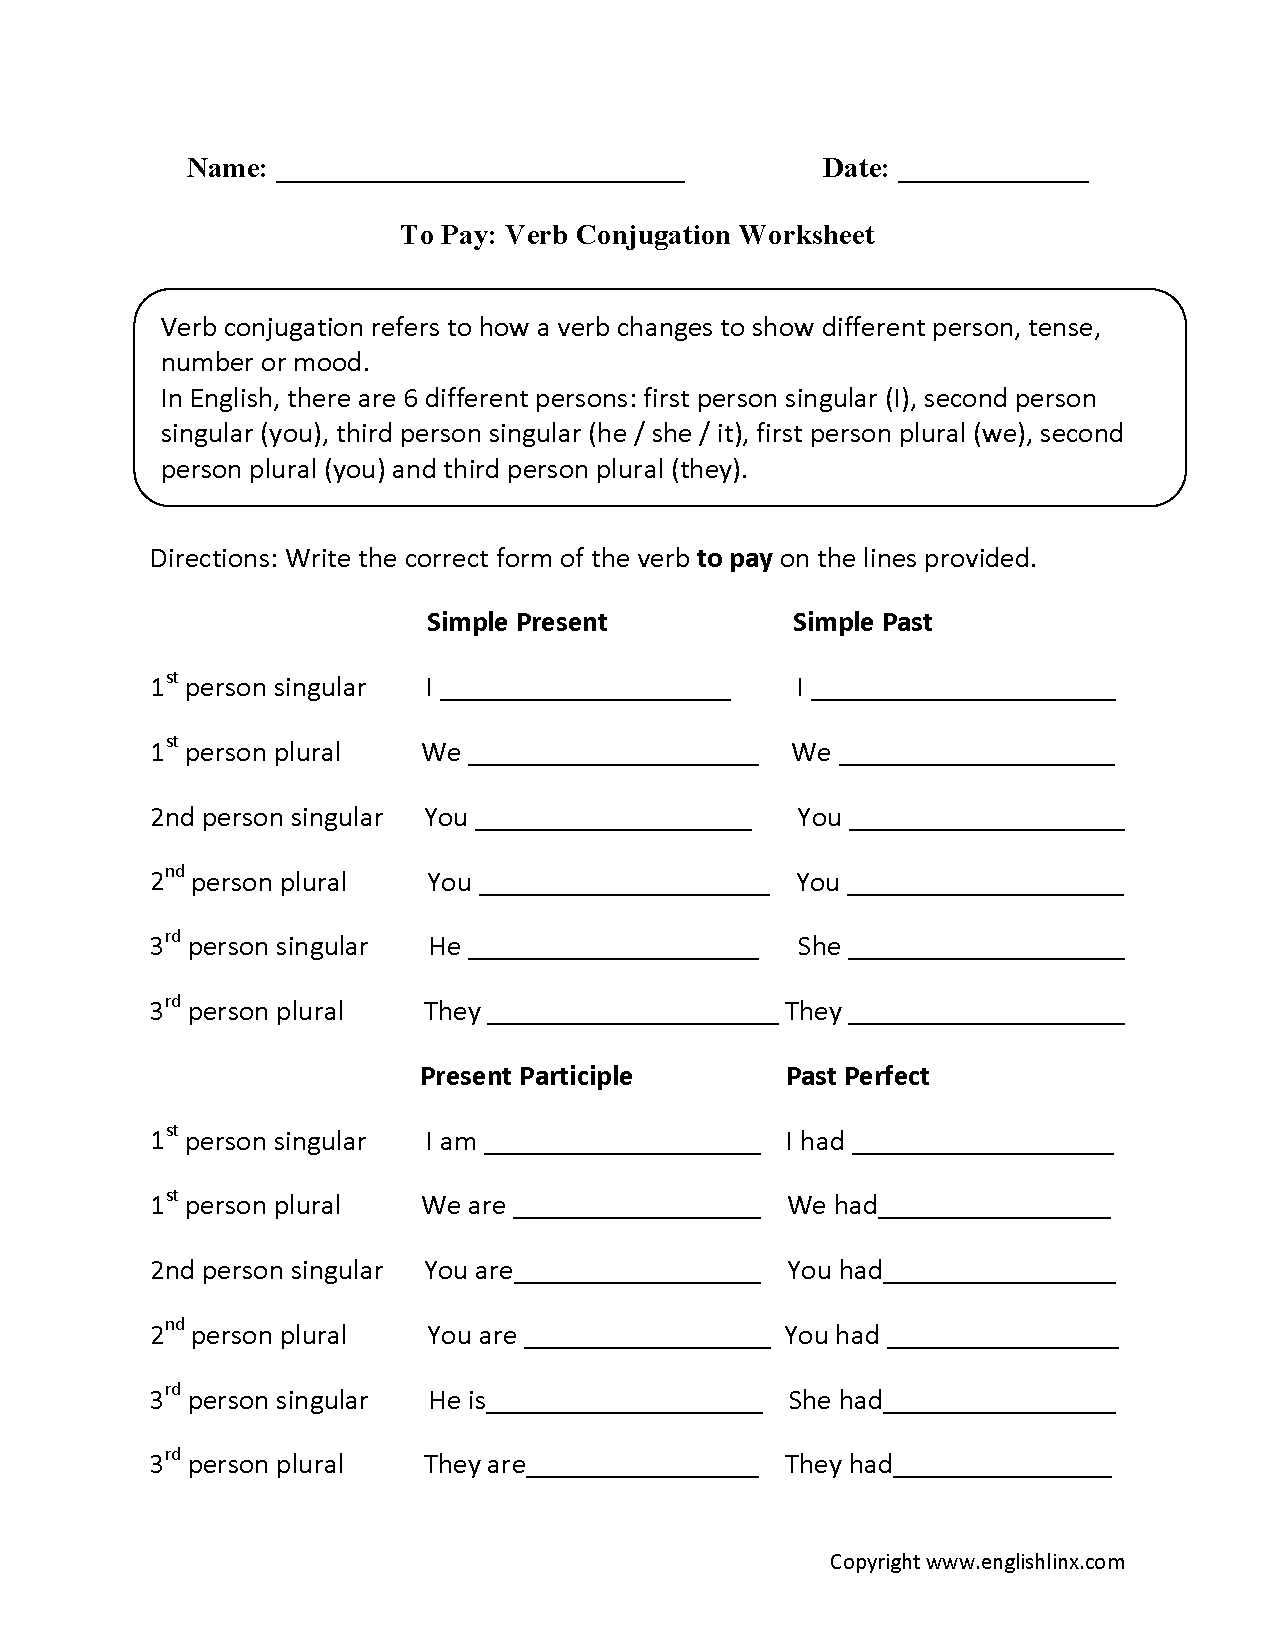 To Pay Verb Conjugation Worksheets